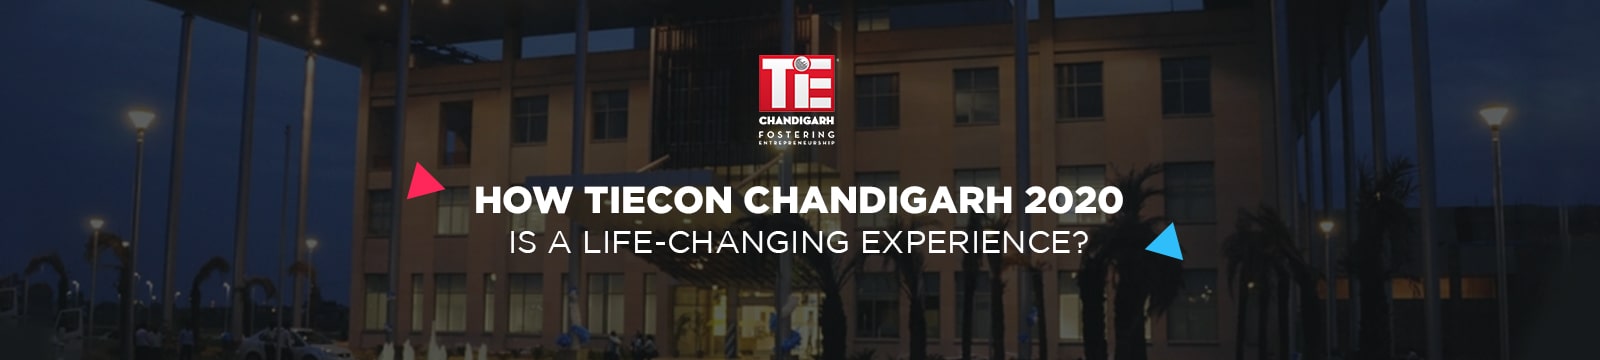 How TiECON Chandigarh 2020 is a Life-changing Experience?